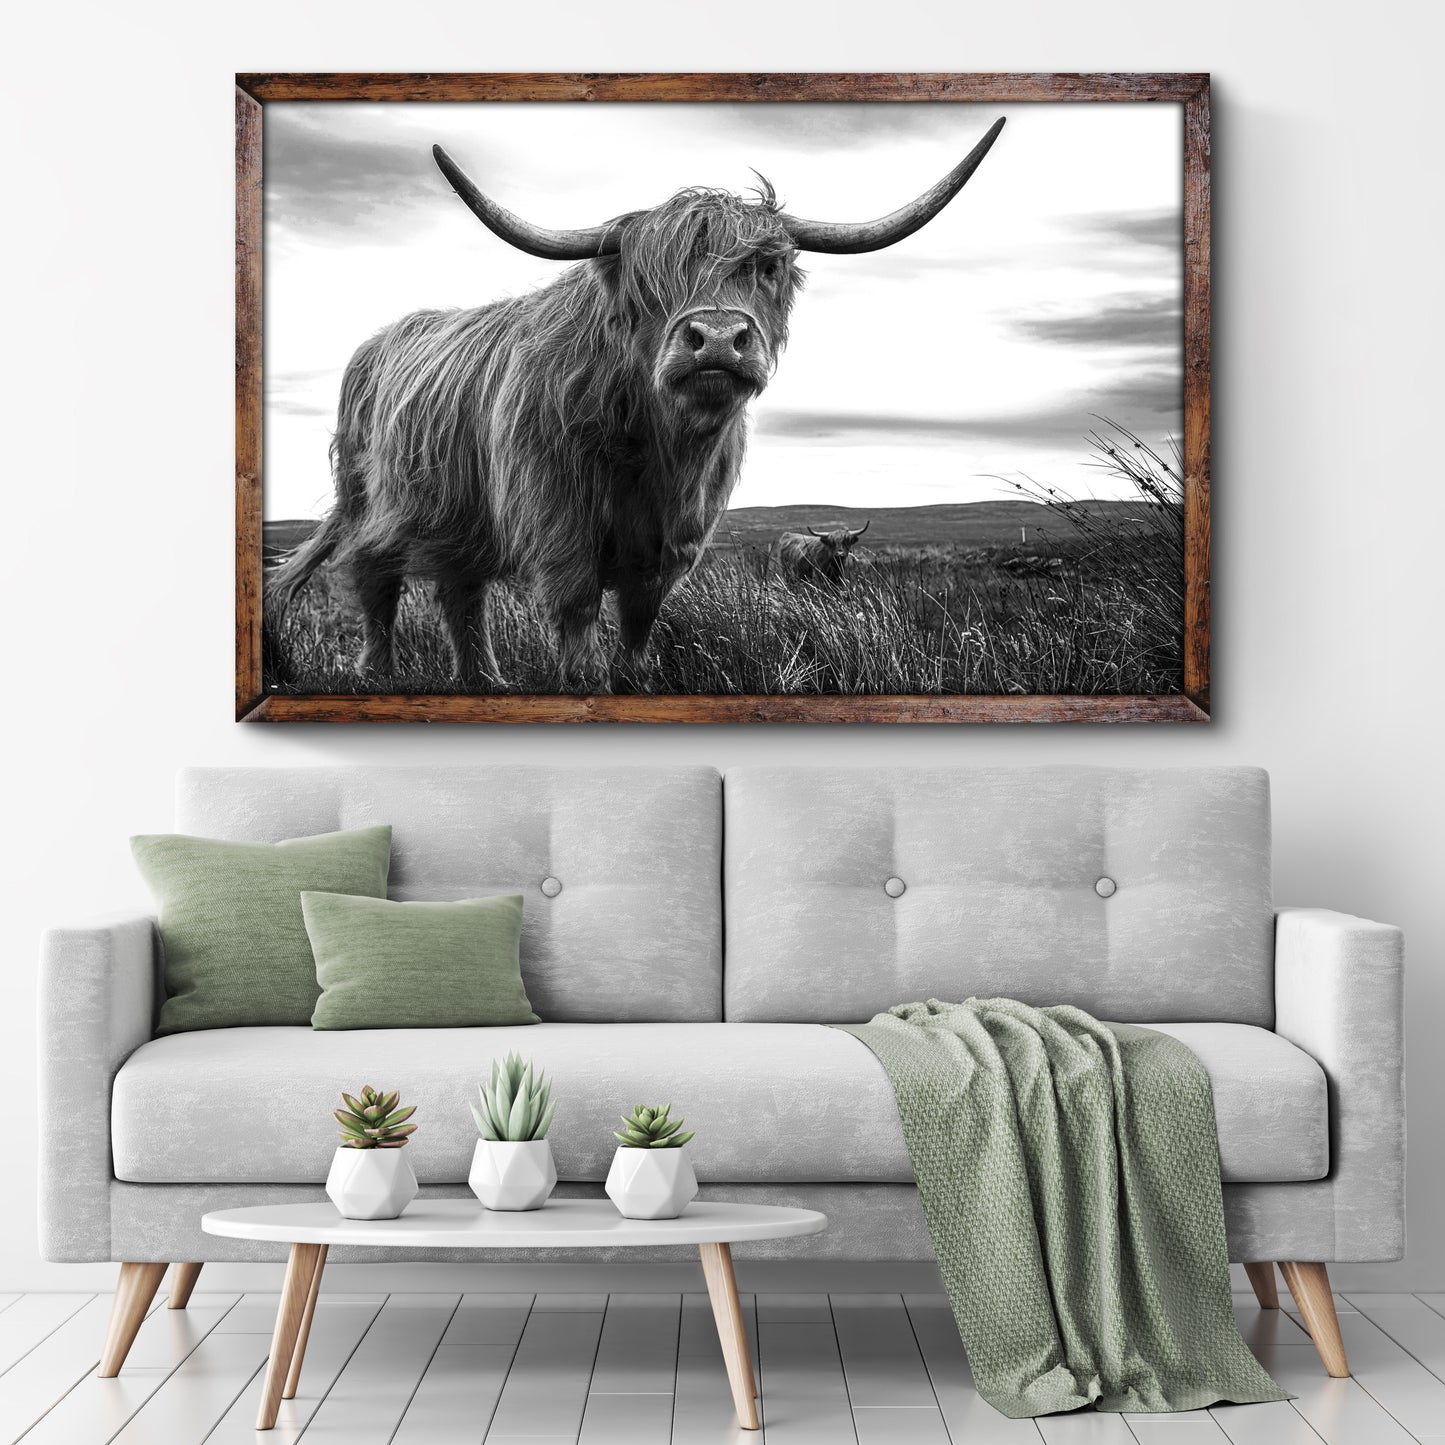 Highland Cow Black And White Portrait Canvas Wall Art Style 2 - Image by Tailored Canvases